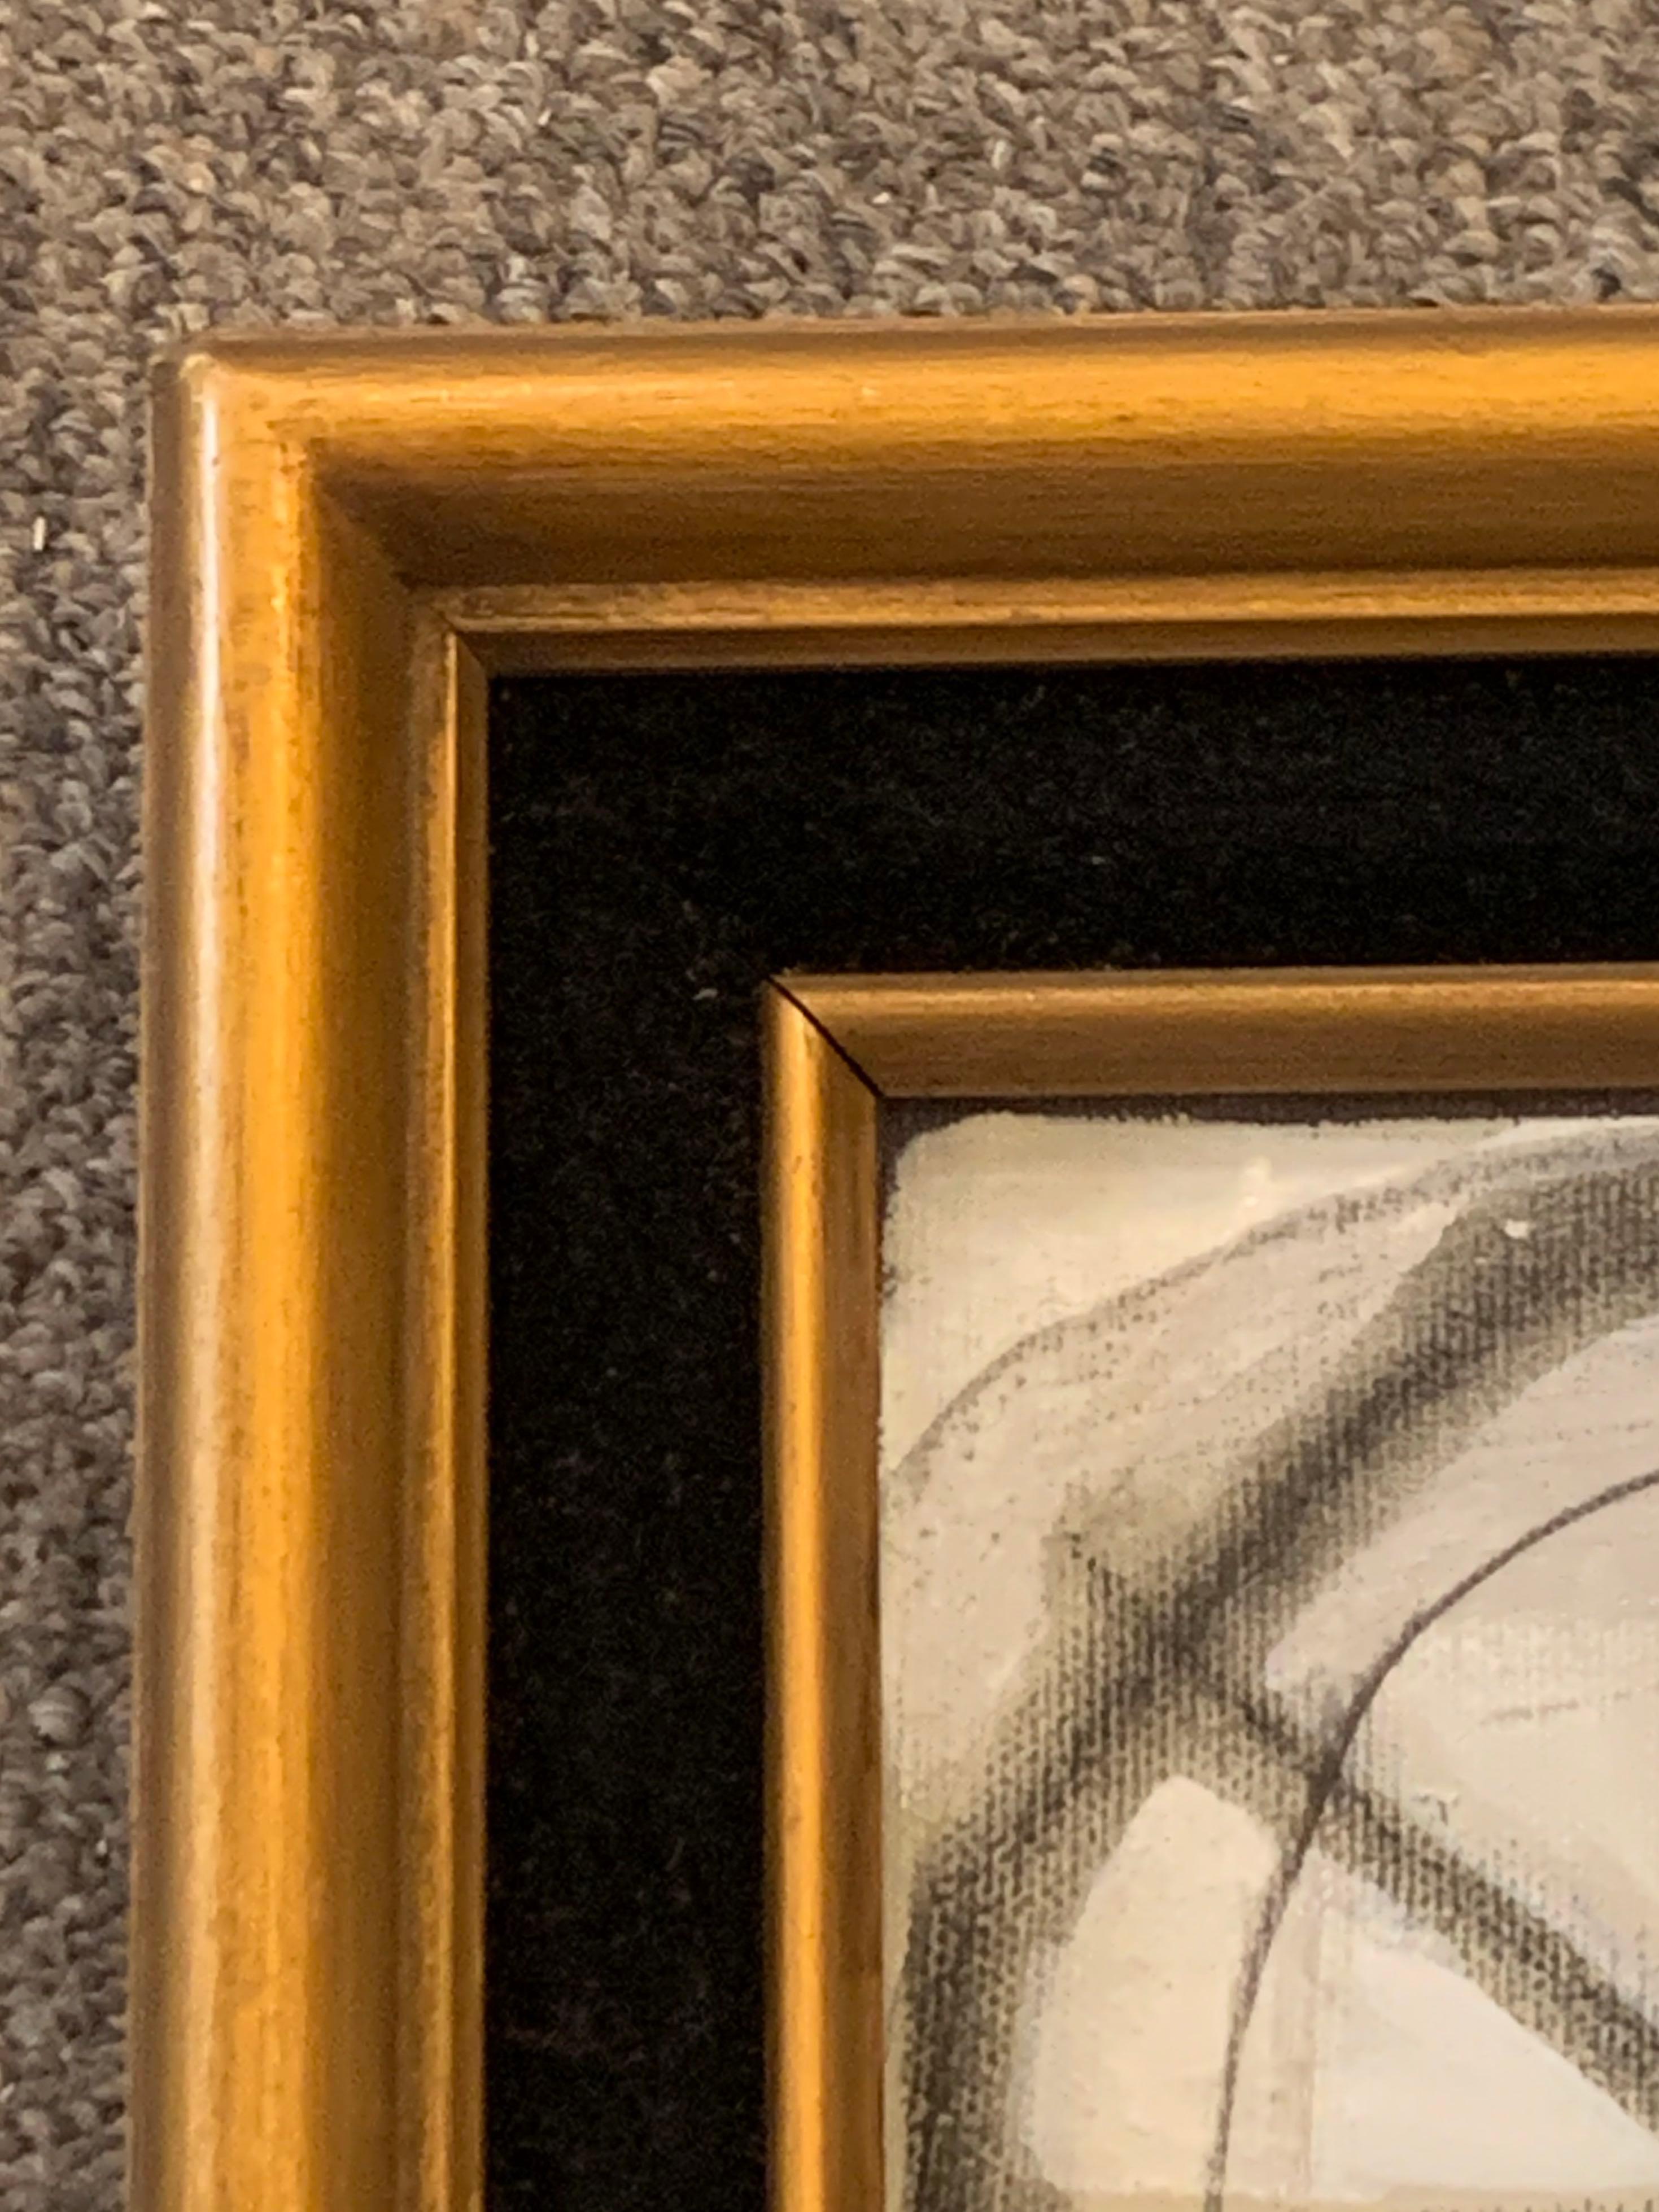 Abstract grey and white gouache painting by American artist Shawn Savage.
Vintage gold gilt and black wood frame.
Signed by the artist.